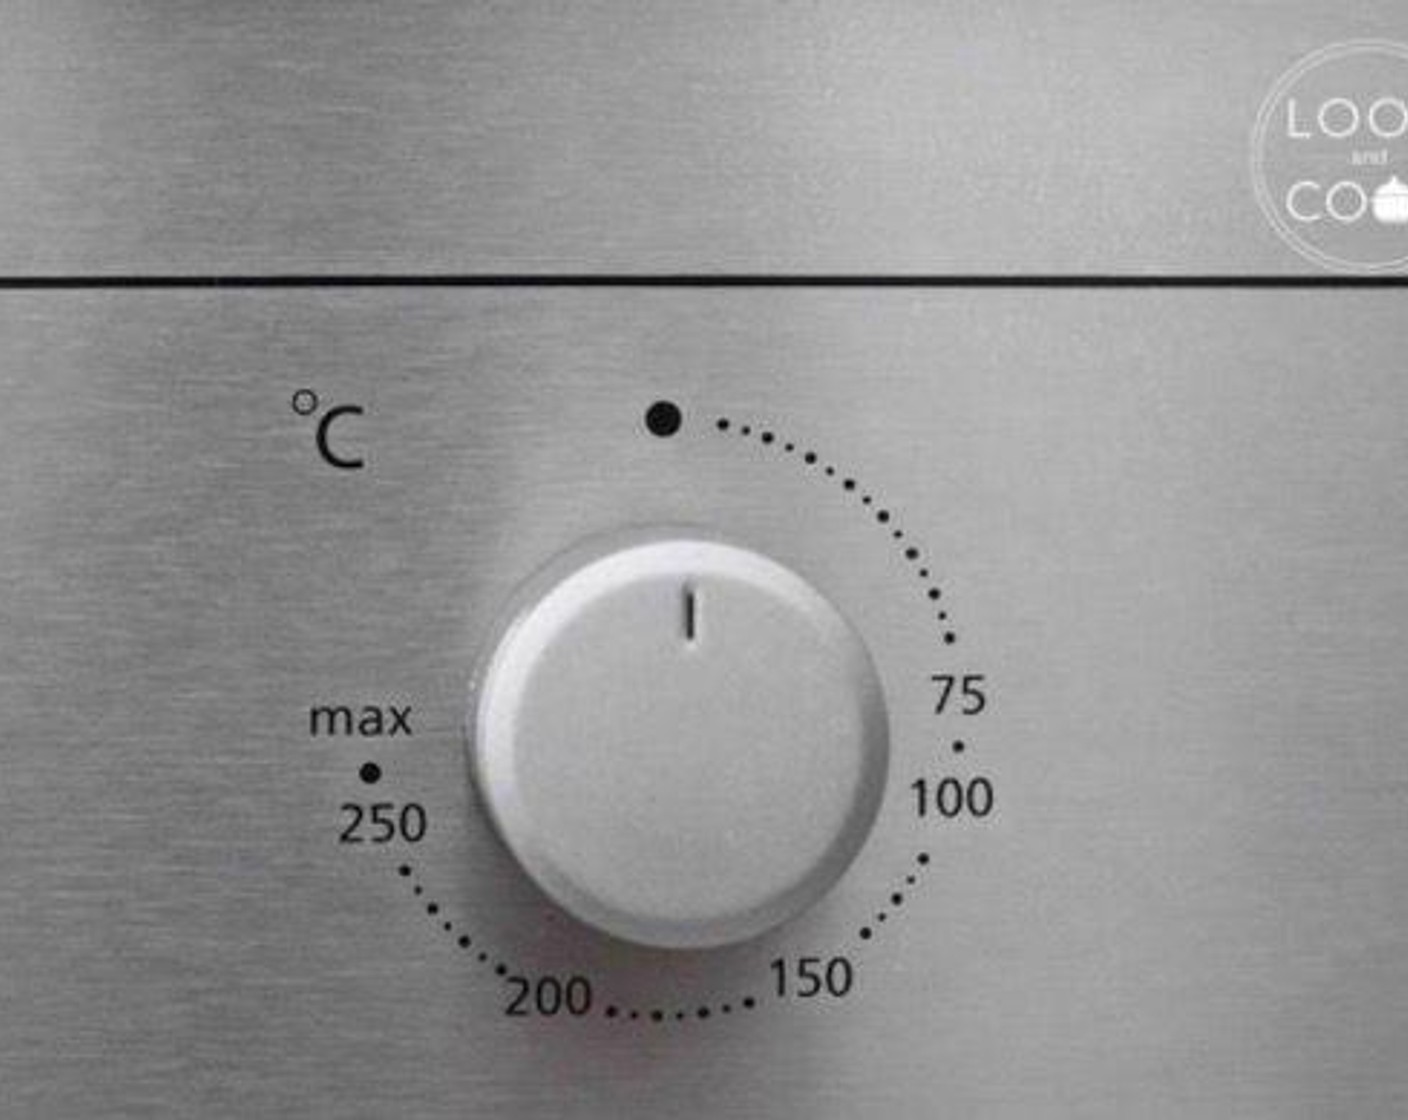 step 1 Preheat the oven to 150 degrees C (300 degrees F).